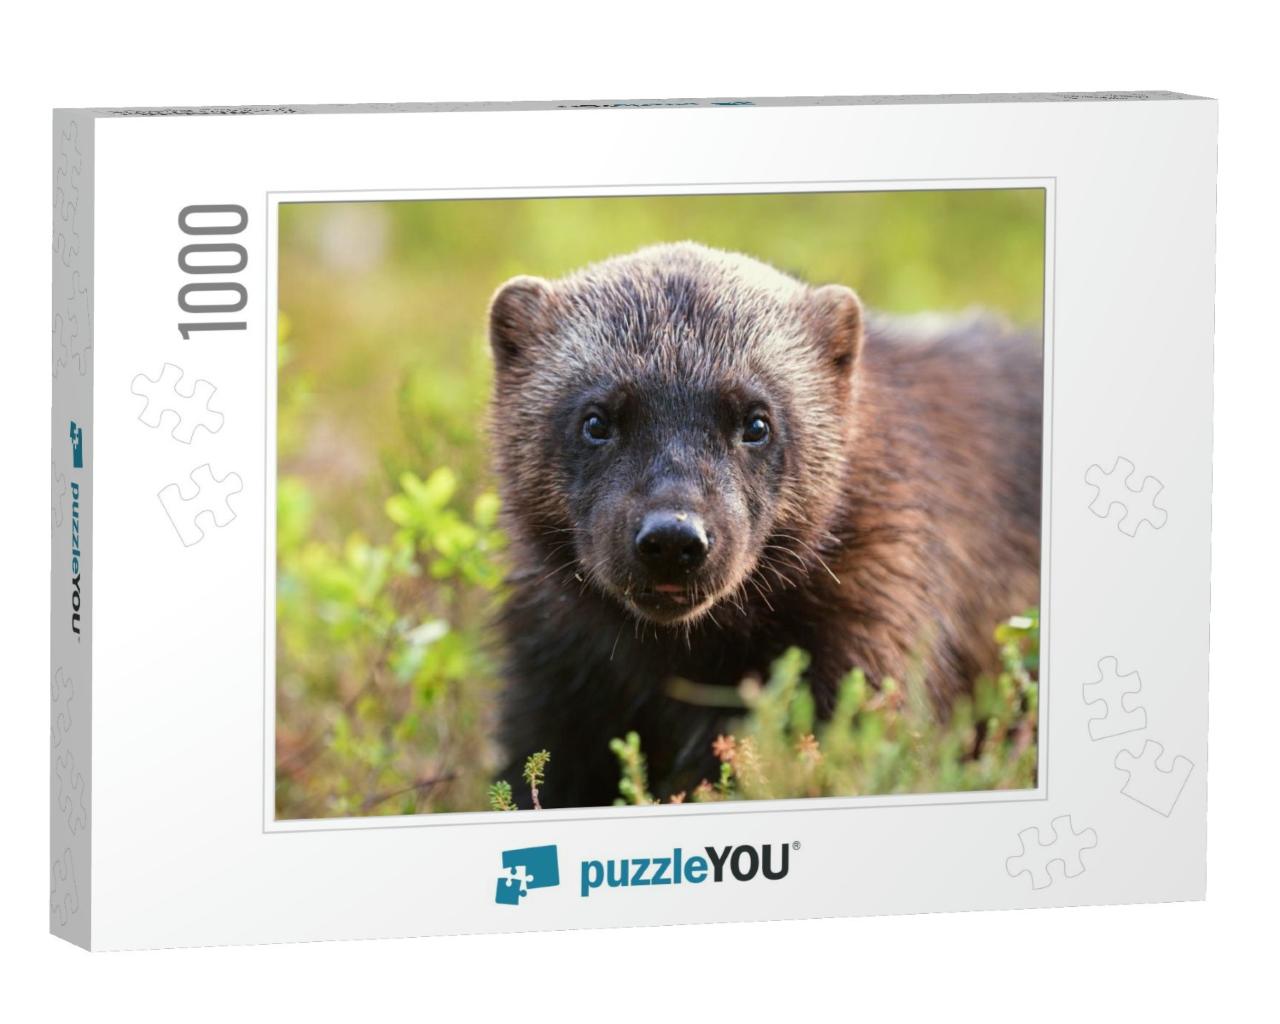 Wolverine Gulo Gulo Portrait. Wolverine Face Closeup... Jigsaw Puzzle with 1000 pieces